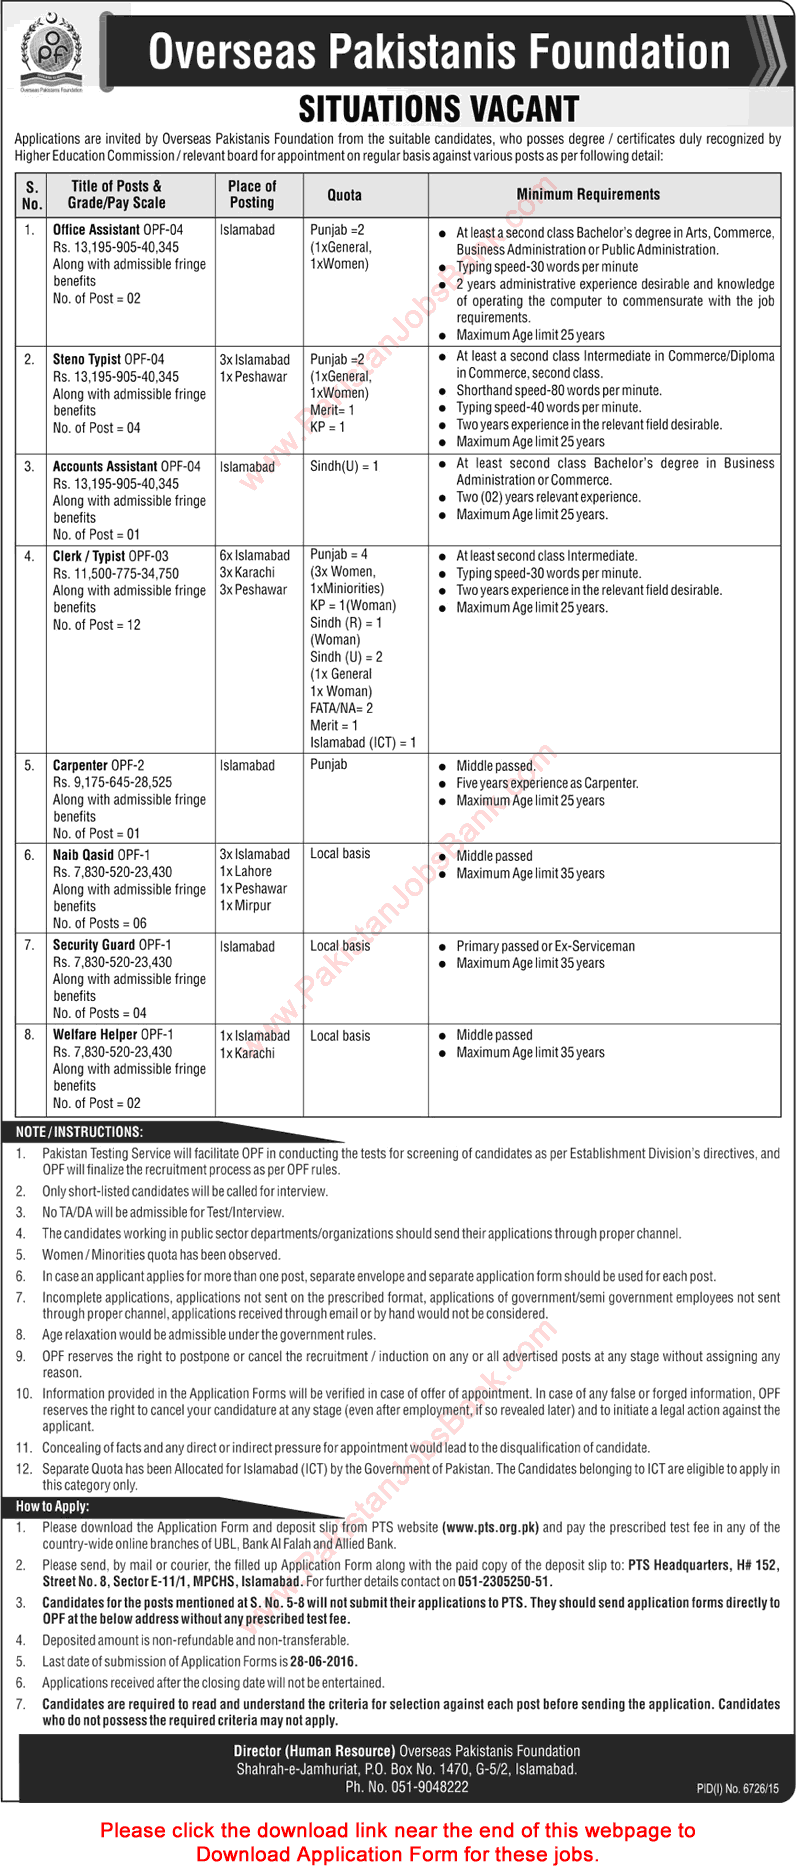 Overseas Pakistanis Foundation Jobs June 2016 OPF PTS Application Form Clerks, Stenotypists & Others Latest